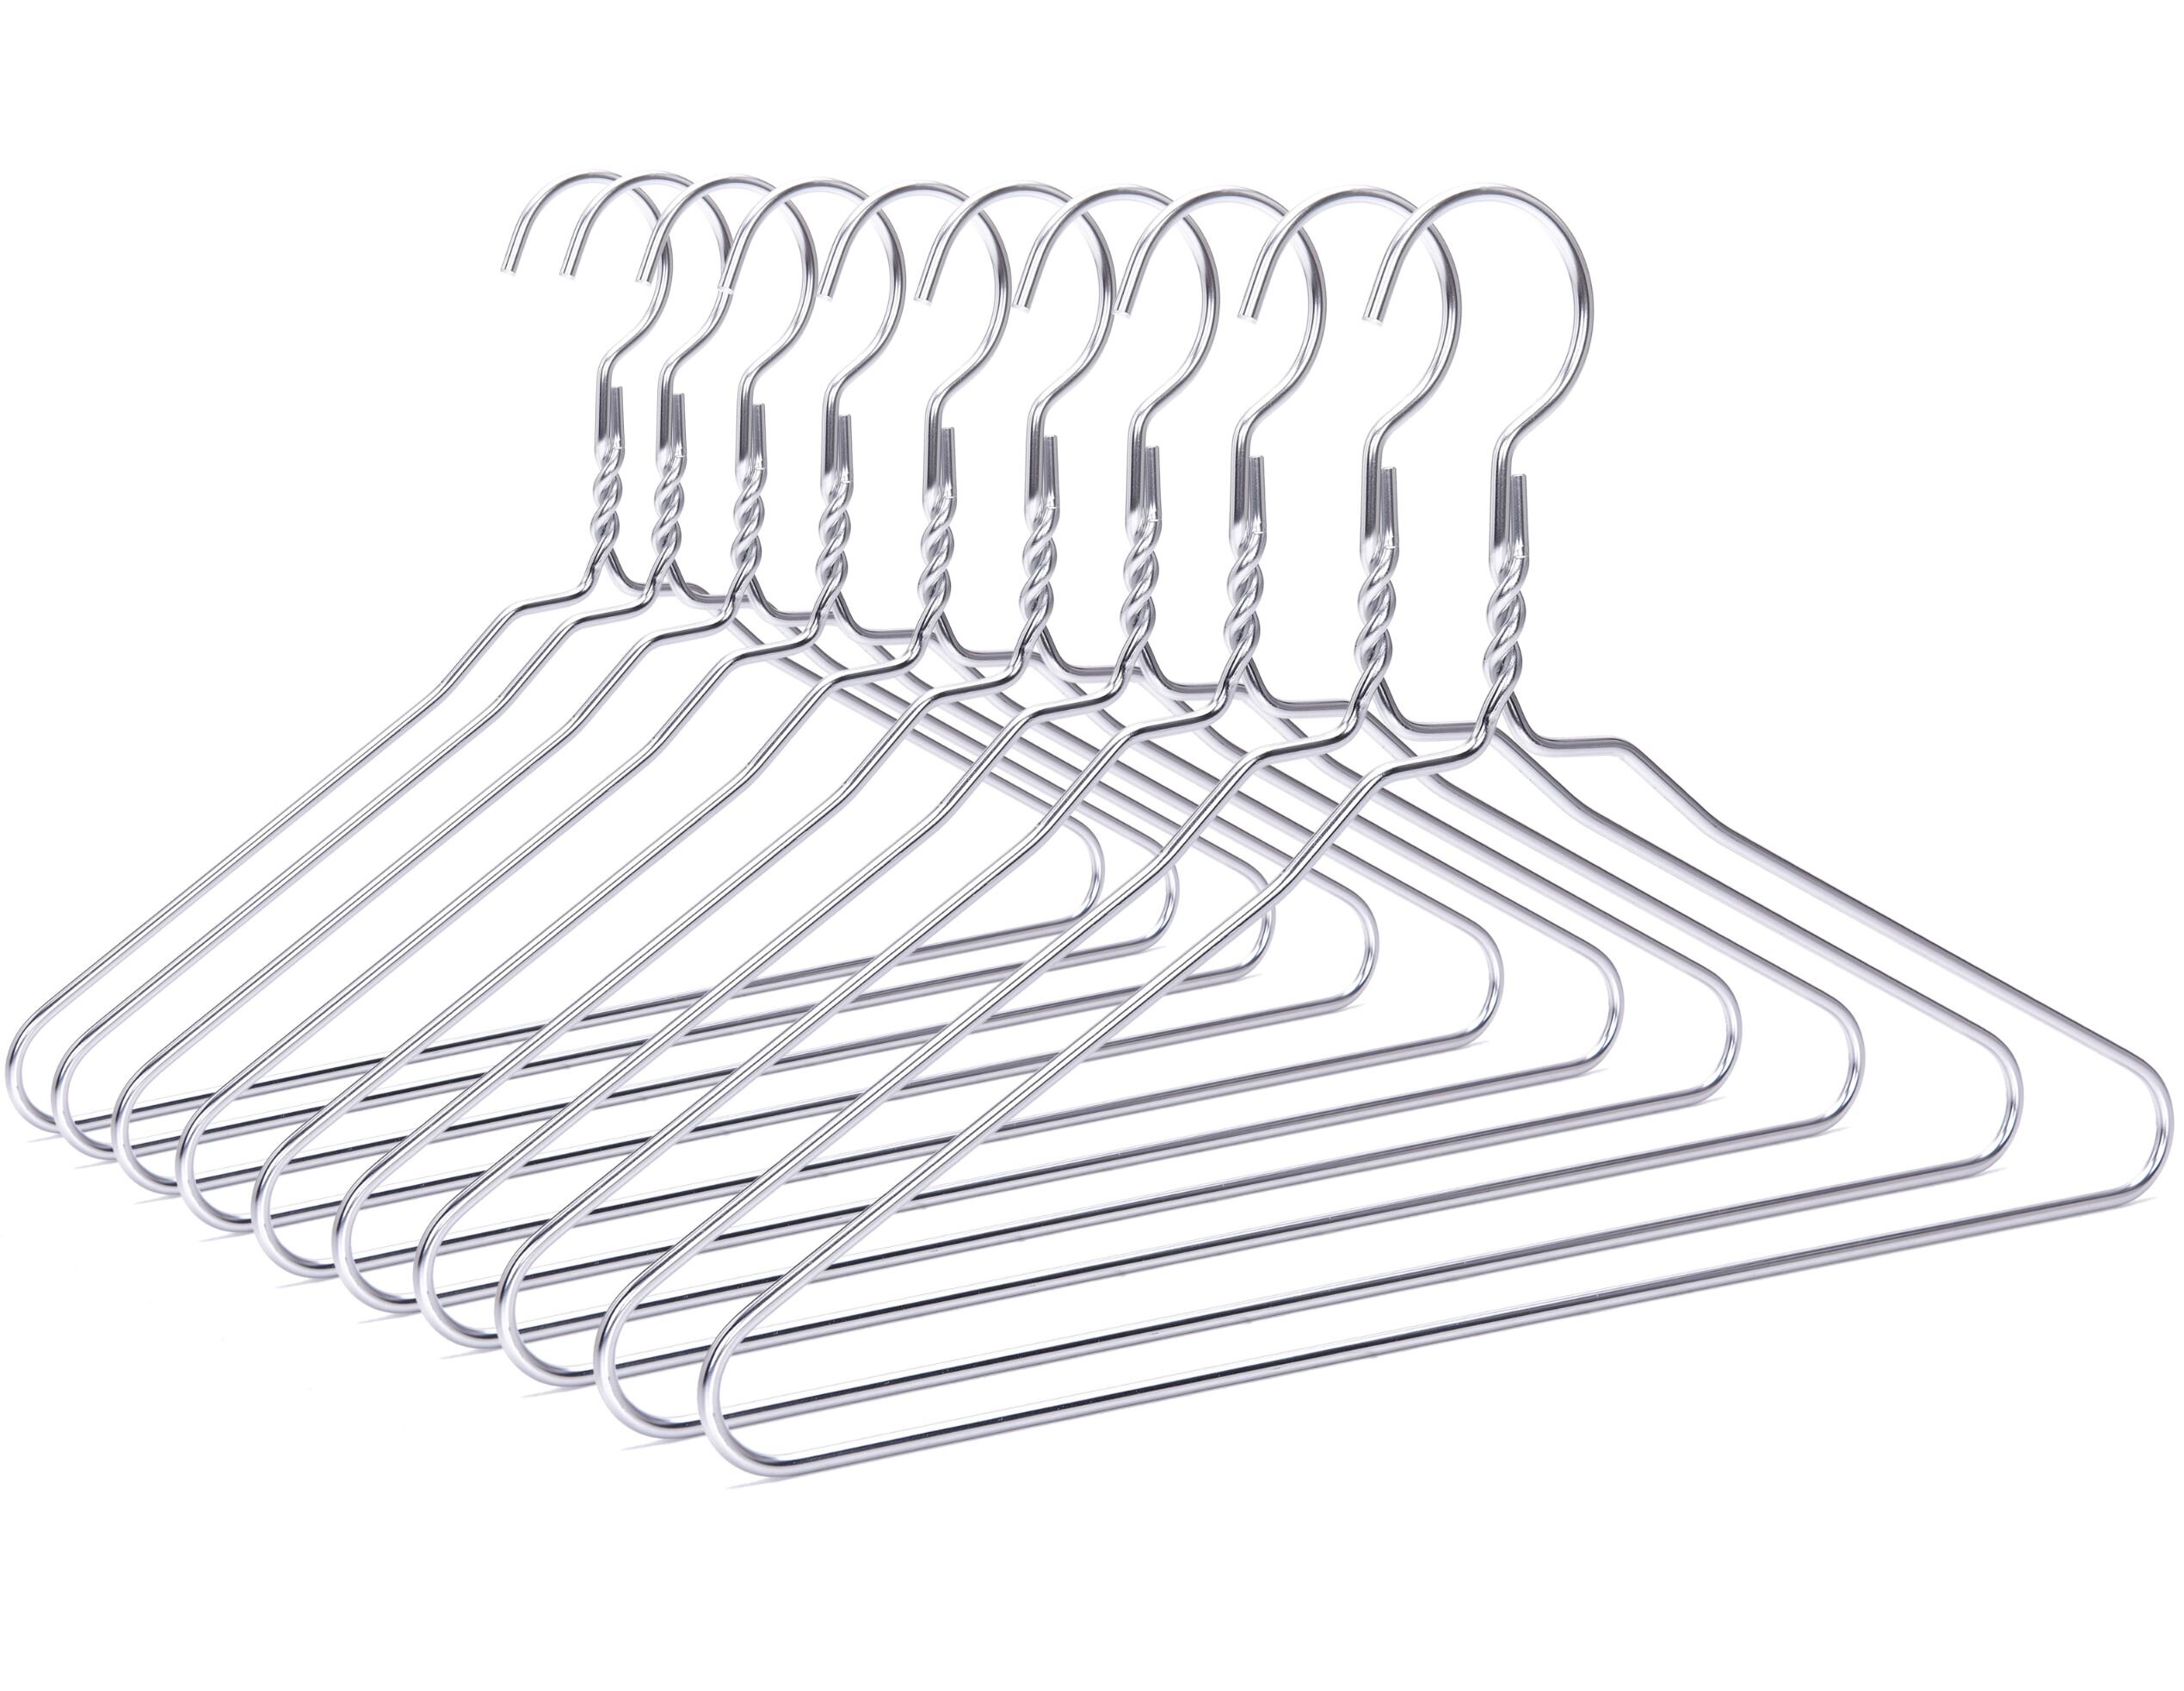 5 PACK HEAVY DUTY ADULT WHITE COAT HANGERS HANGER STRONG STEEL CLOTHES DRESS